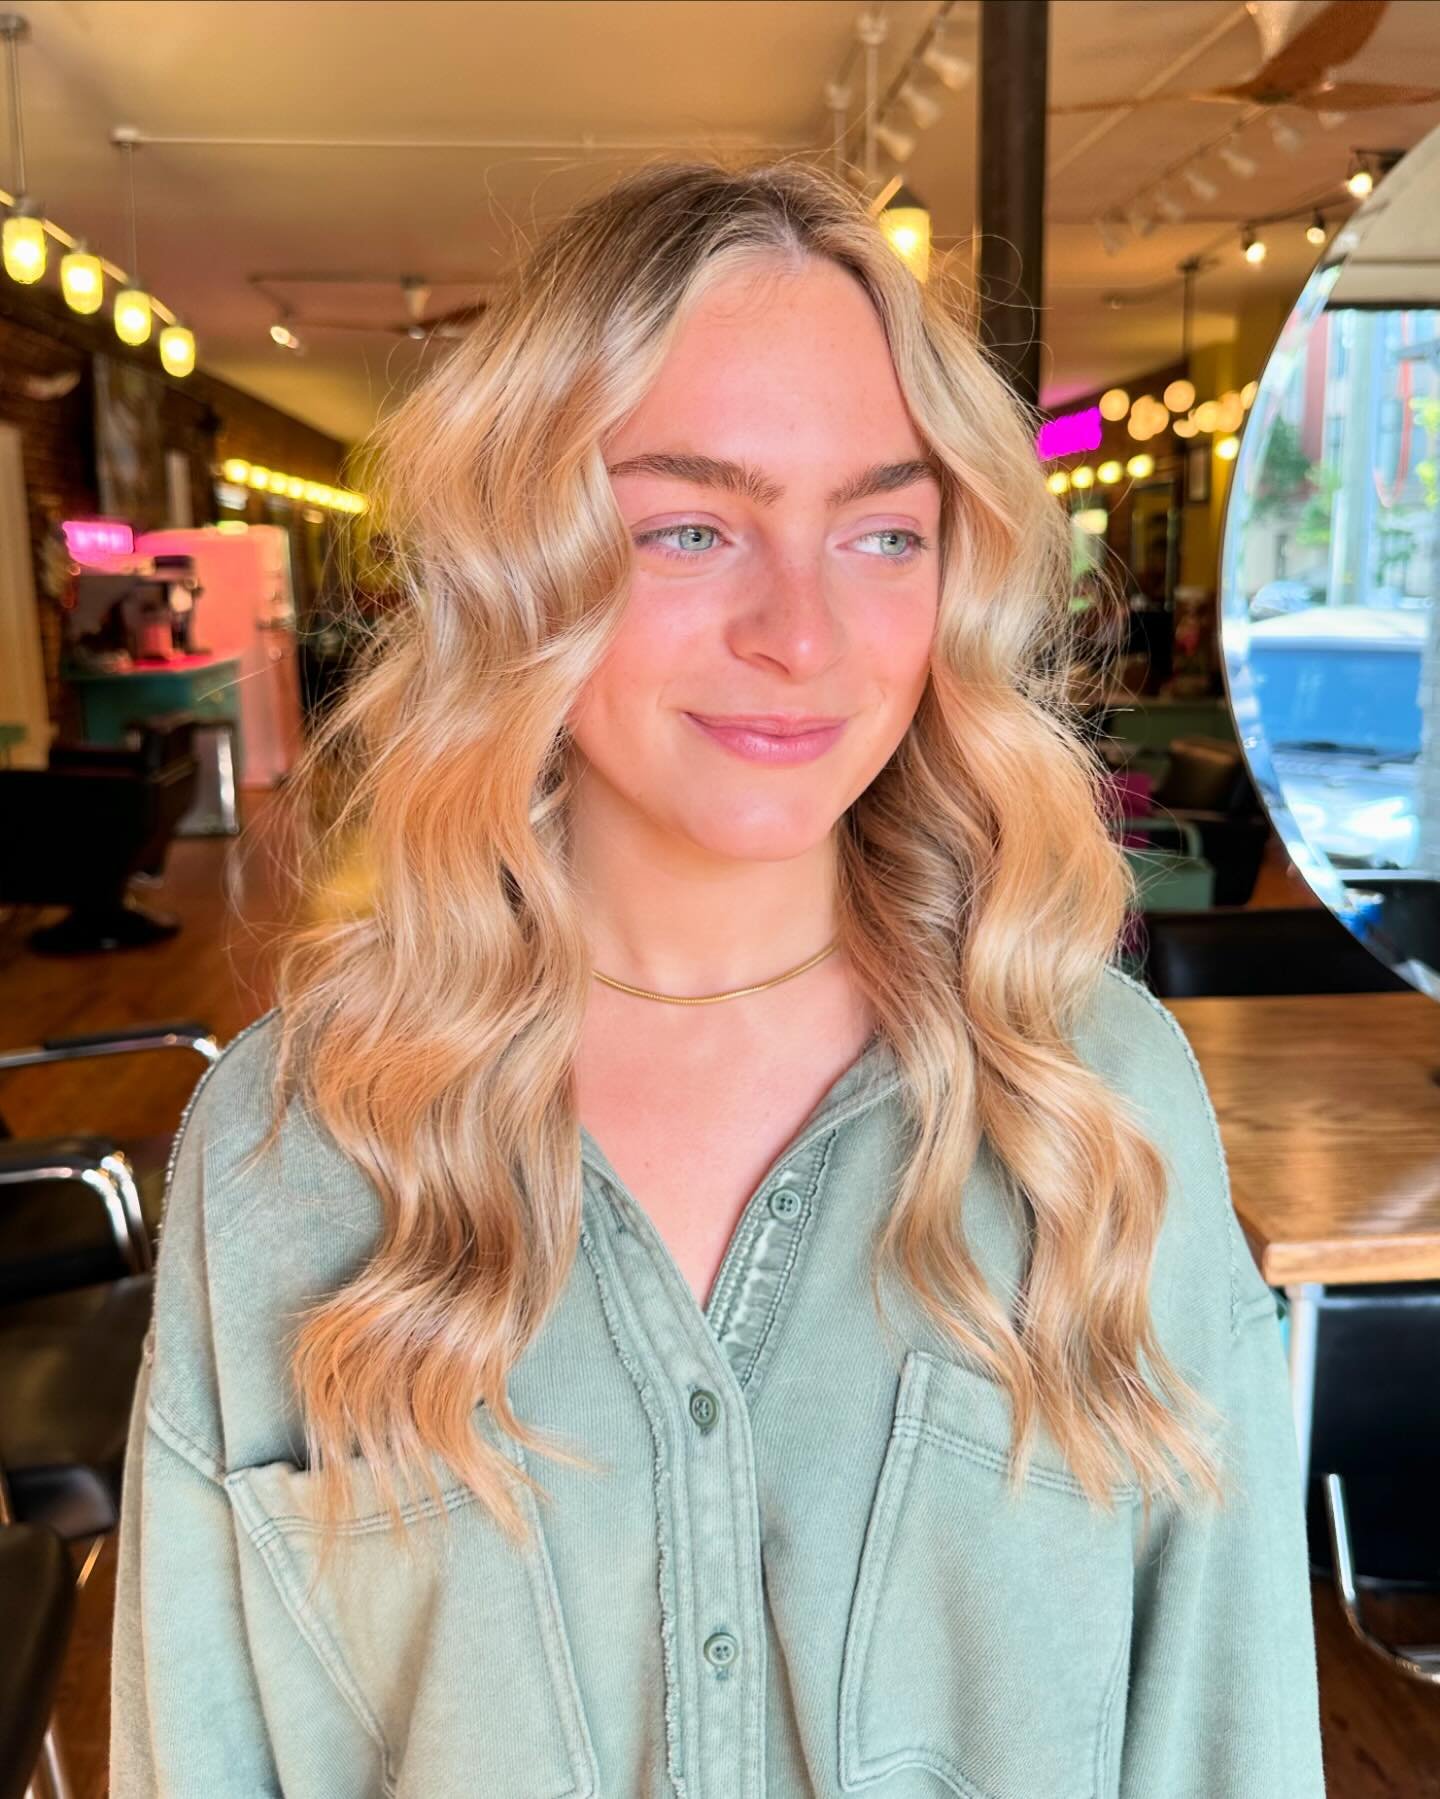 Smooth like butter 🧈 

This blend is perfection, and @gracemazepa eats anything we do to her. 

#universityofkentucky #hairthelex #sharethelex #lexingtonkyhair #kyhairs #kentuckyhairs #summerblonde #blendedblonde